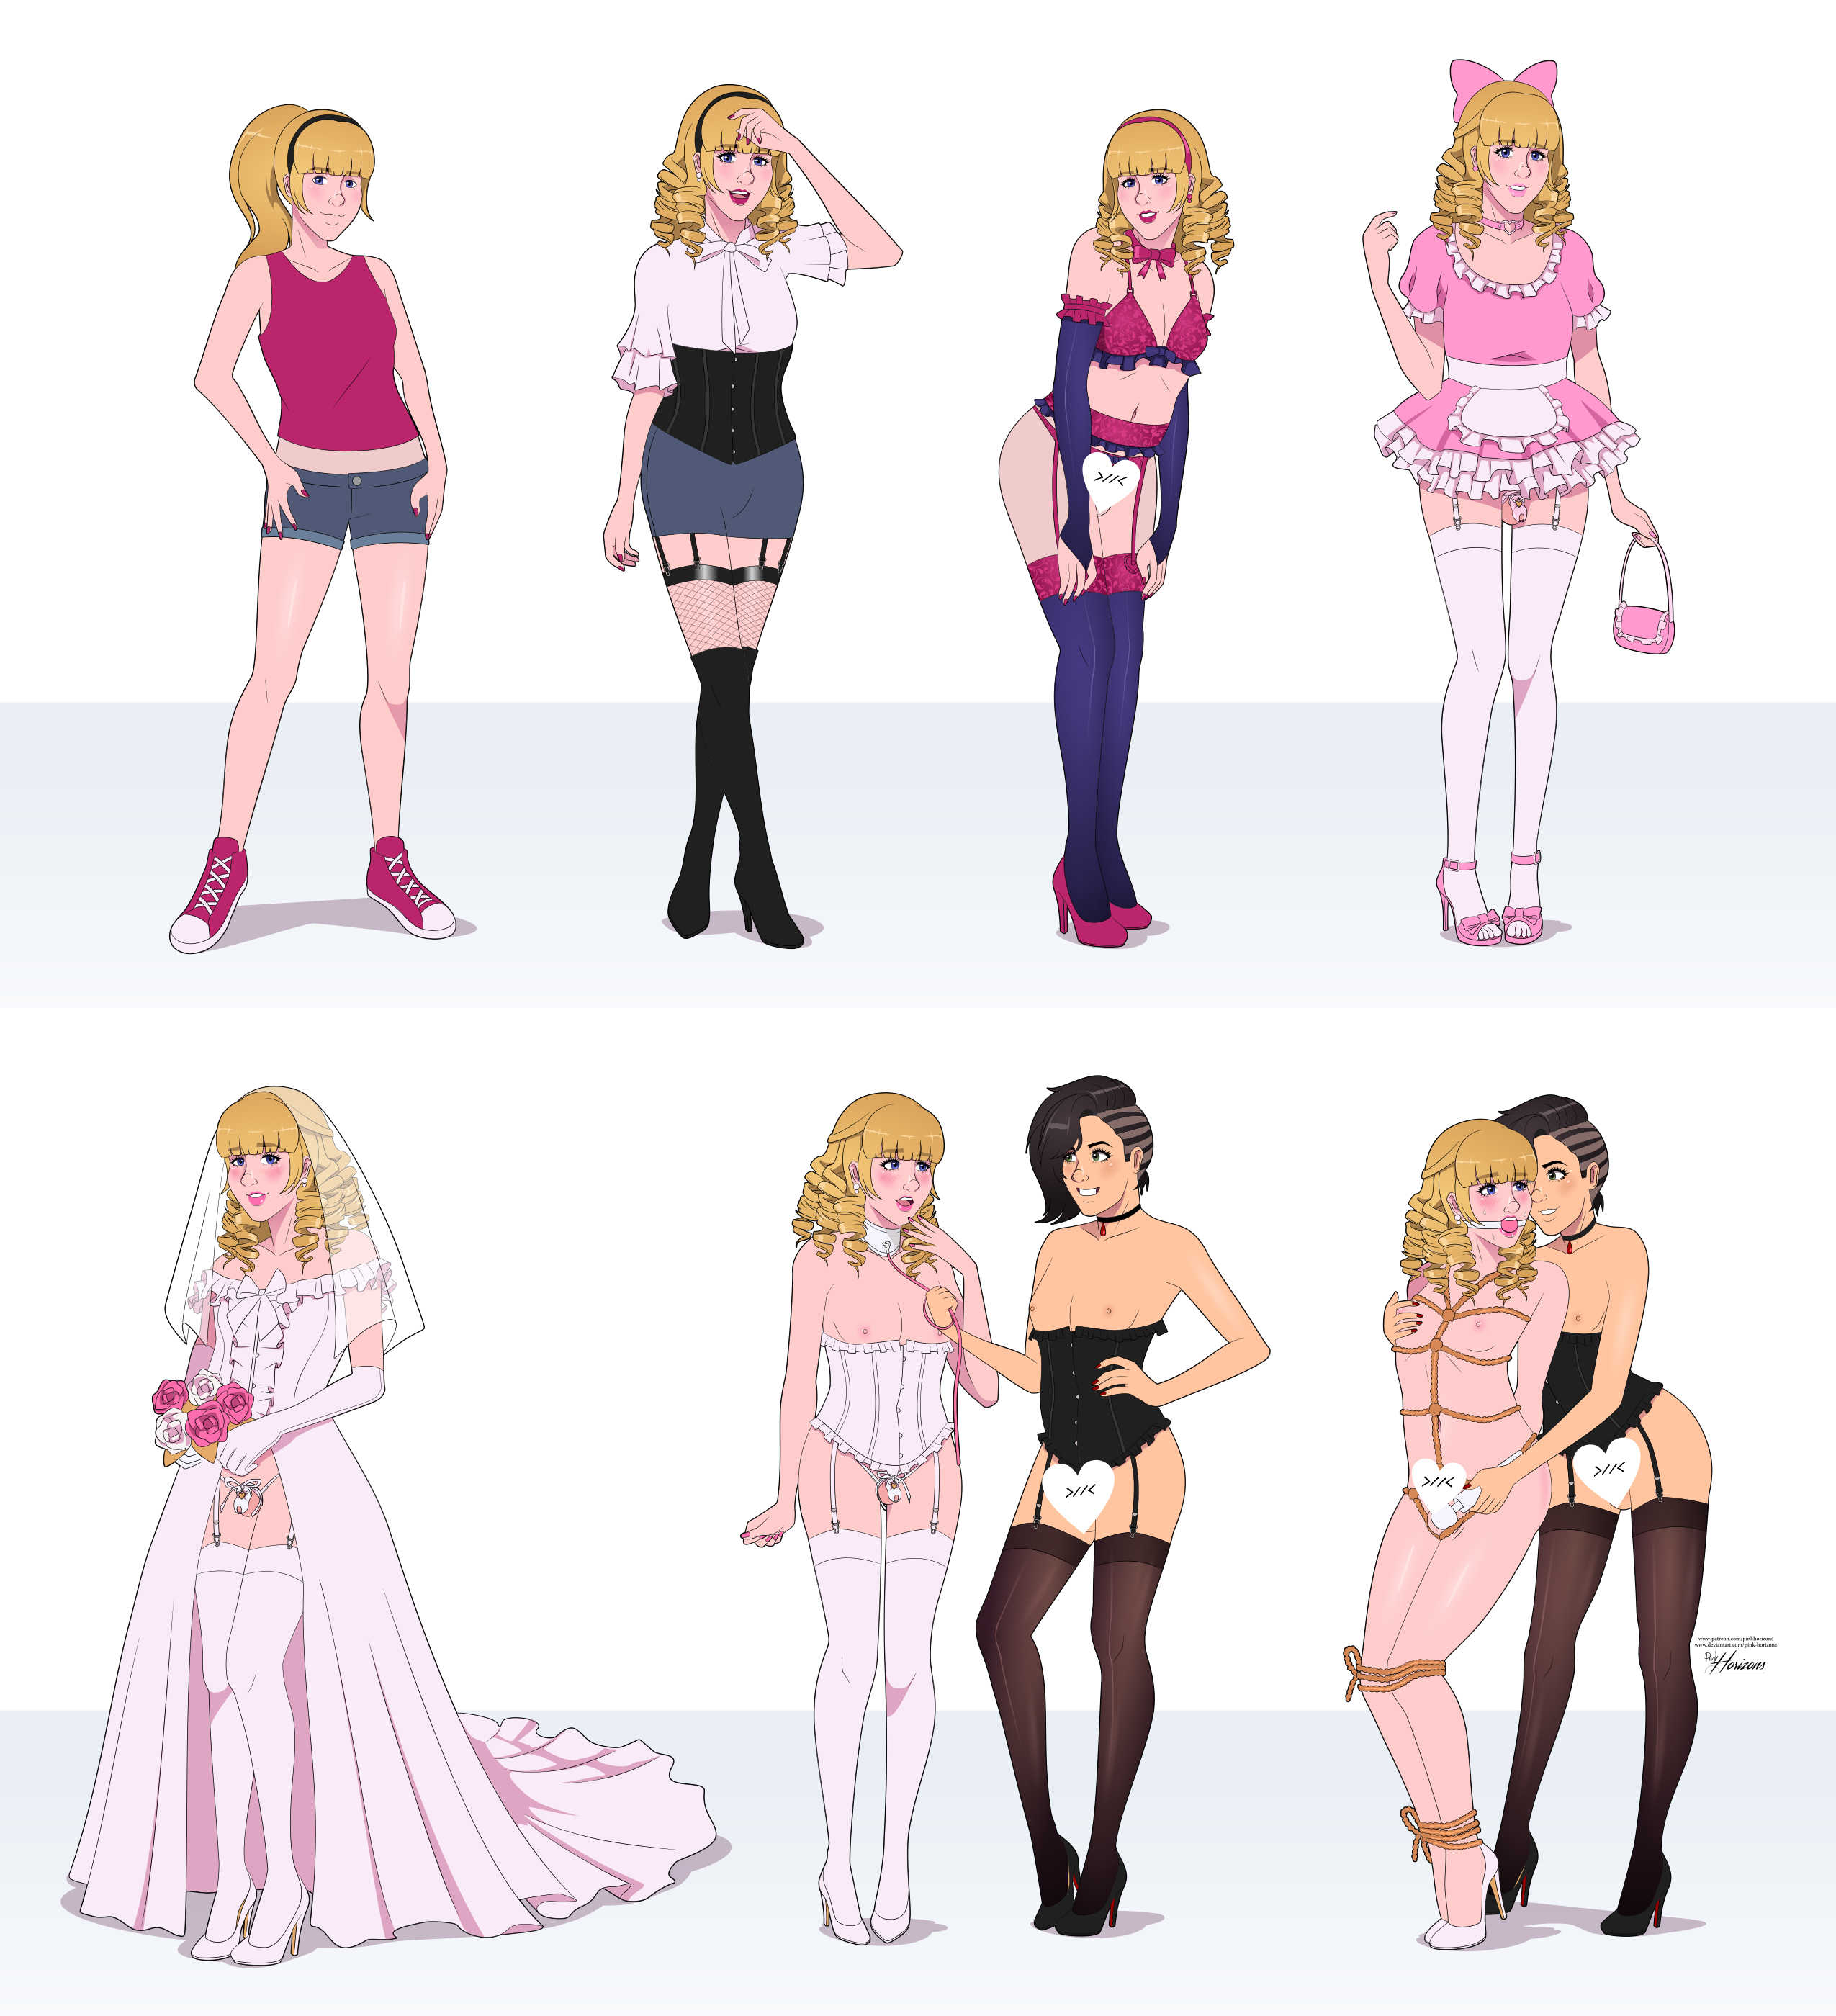 Femboy And Sissies By Goddess4all On Deviantart